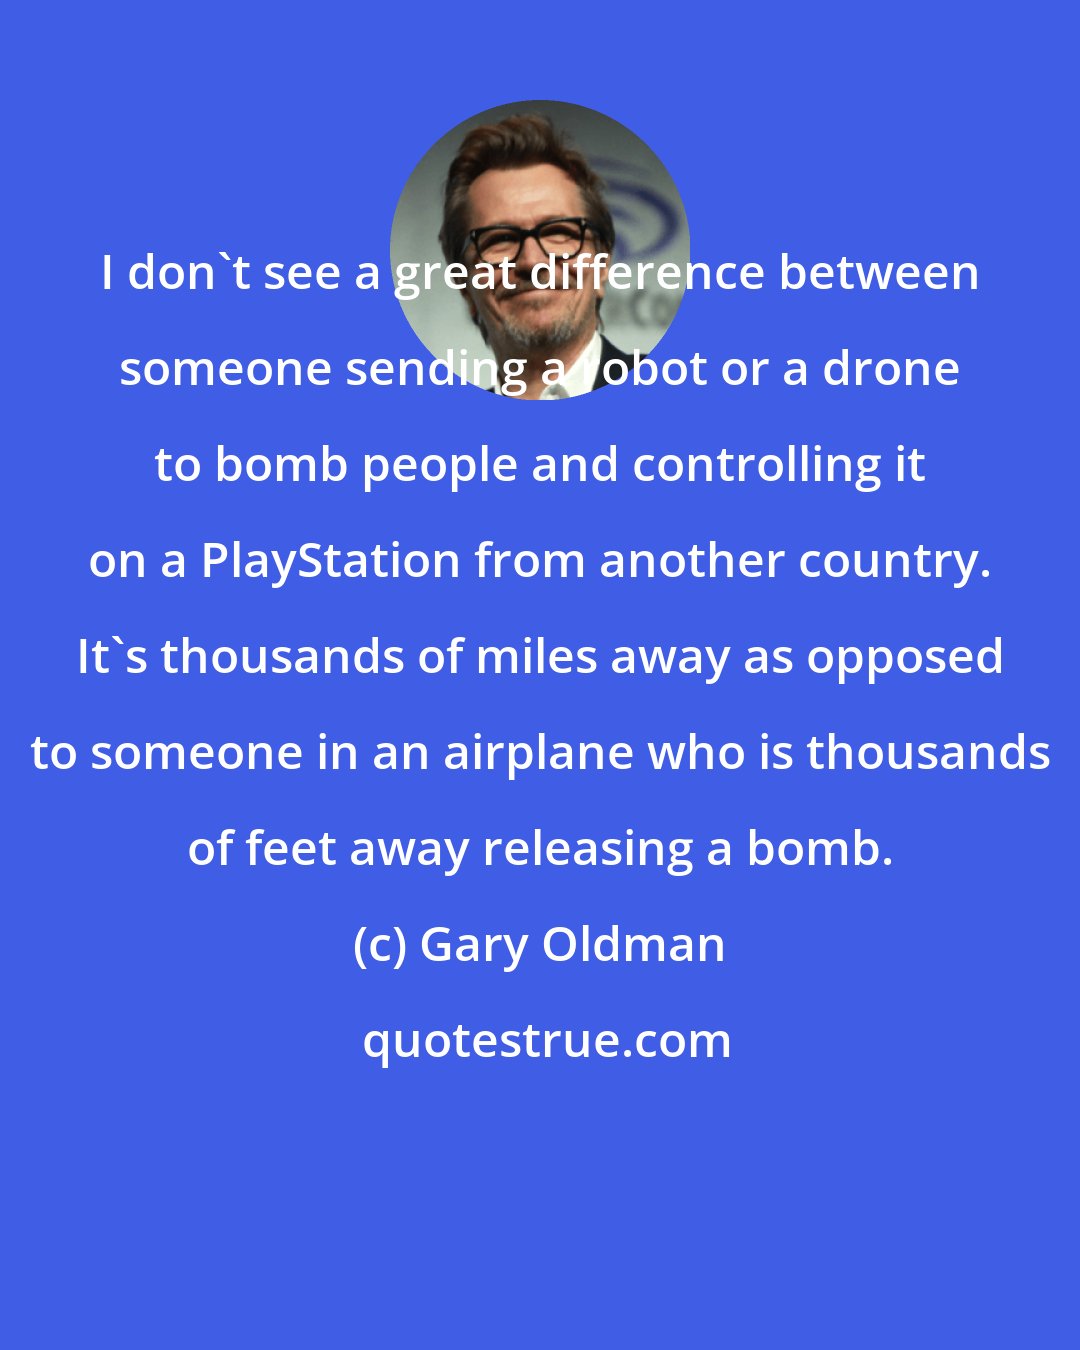 Gary Oldman: I don't see a great difference between someone sending a robot or a drone to bomb people and controlling it on a PlayStation from another country. It's thousands of miles away as opposed to someone in an airplane who is thousands of feet away releasing a bomb.